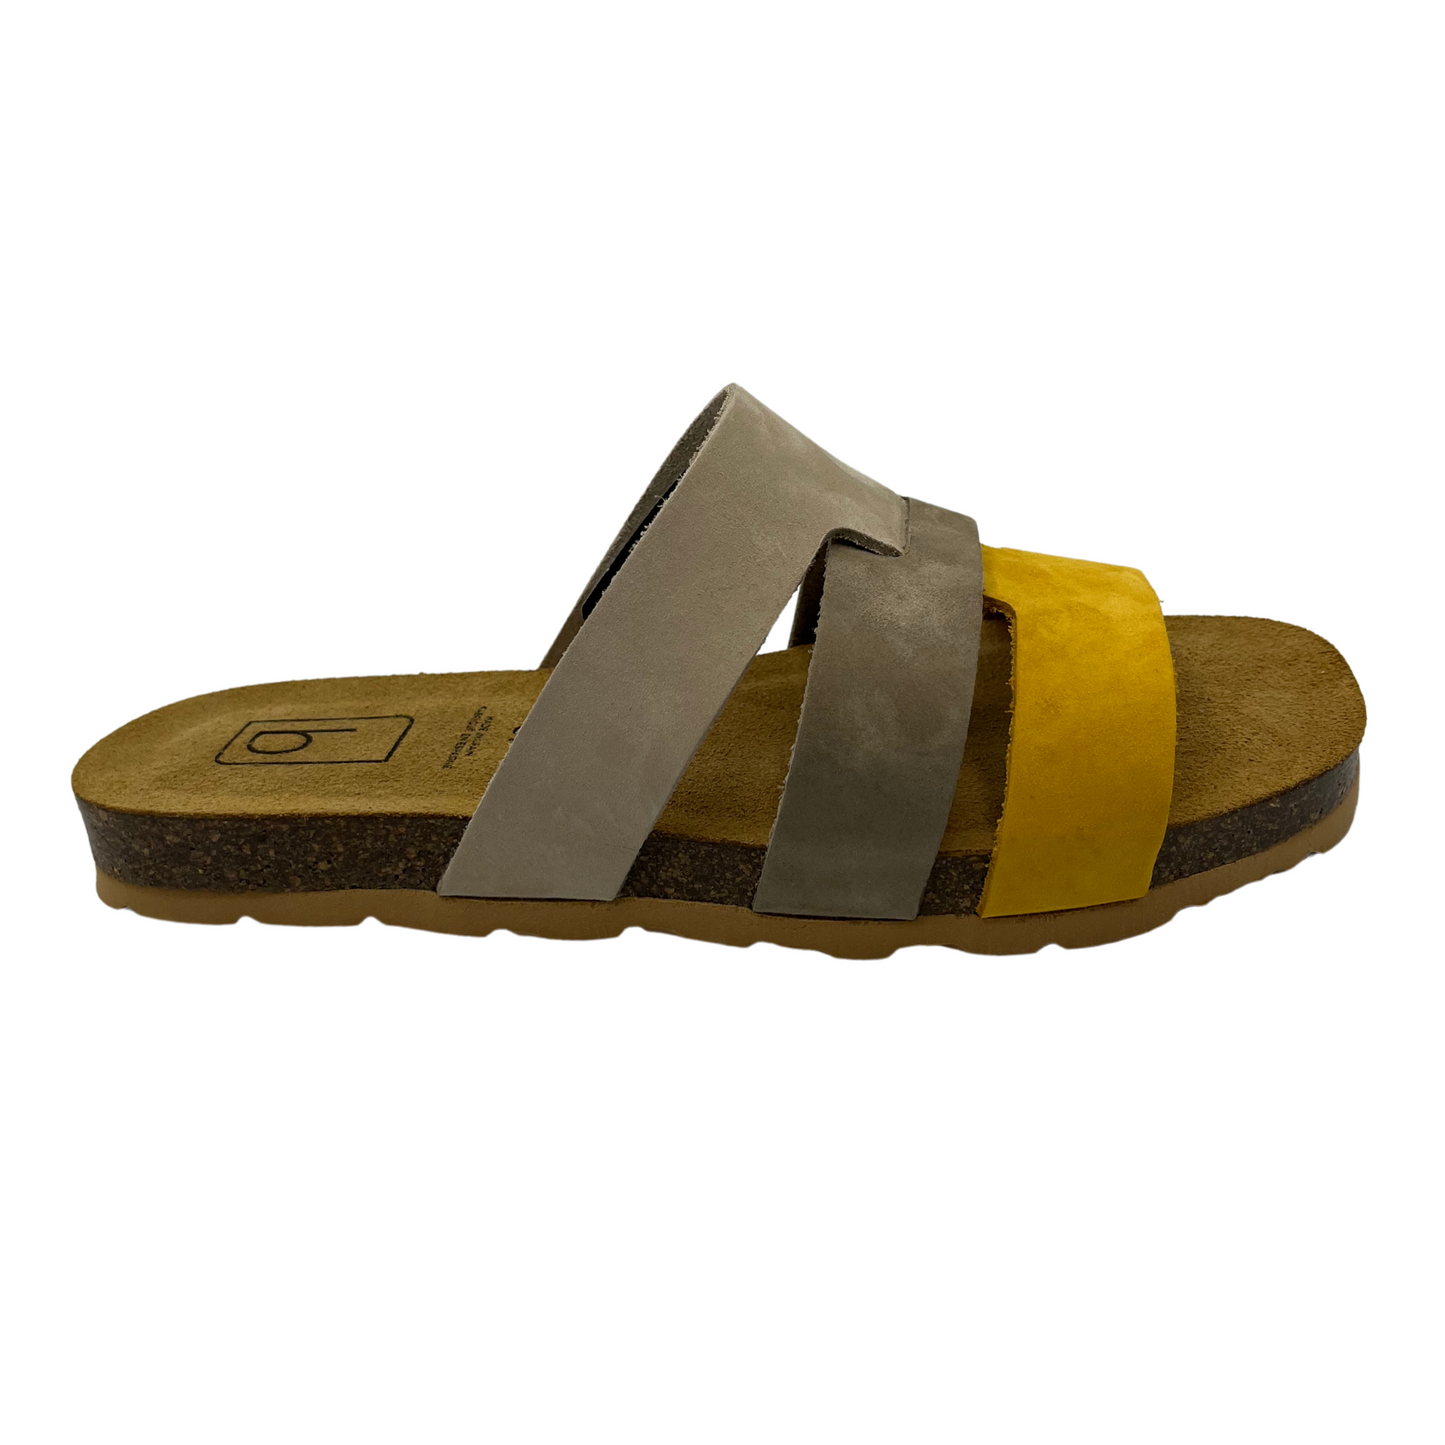 Right facing view of beige and yellow suede slip on sandal with tan lined contoured footbed